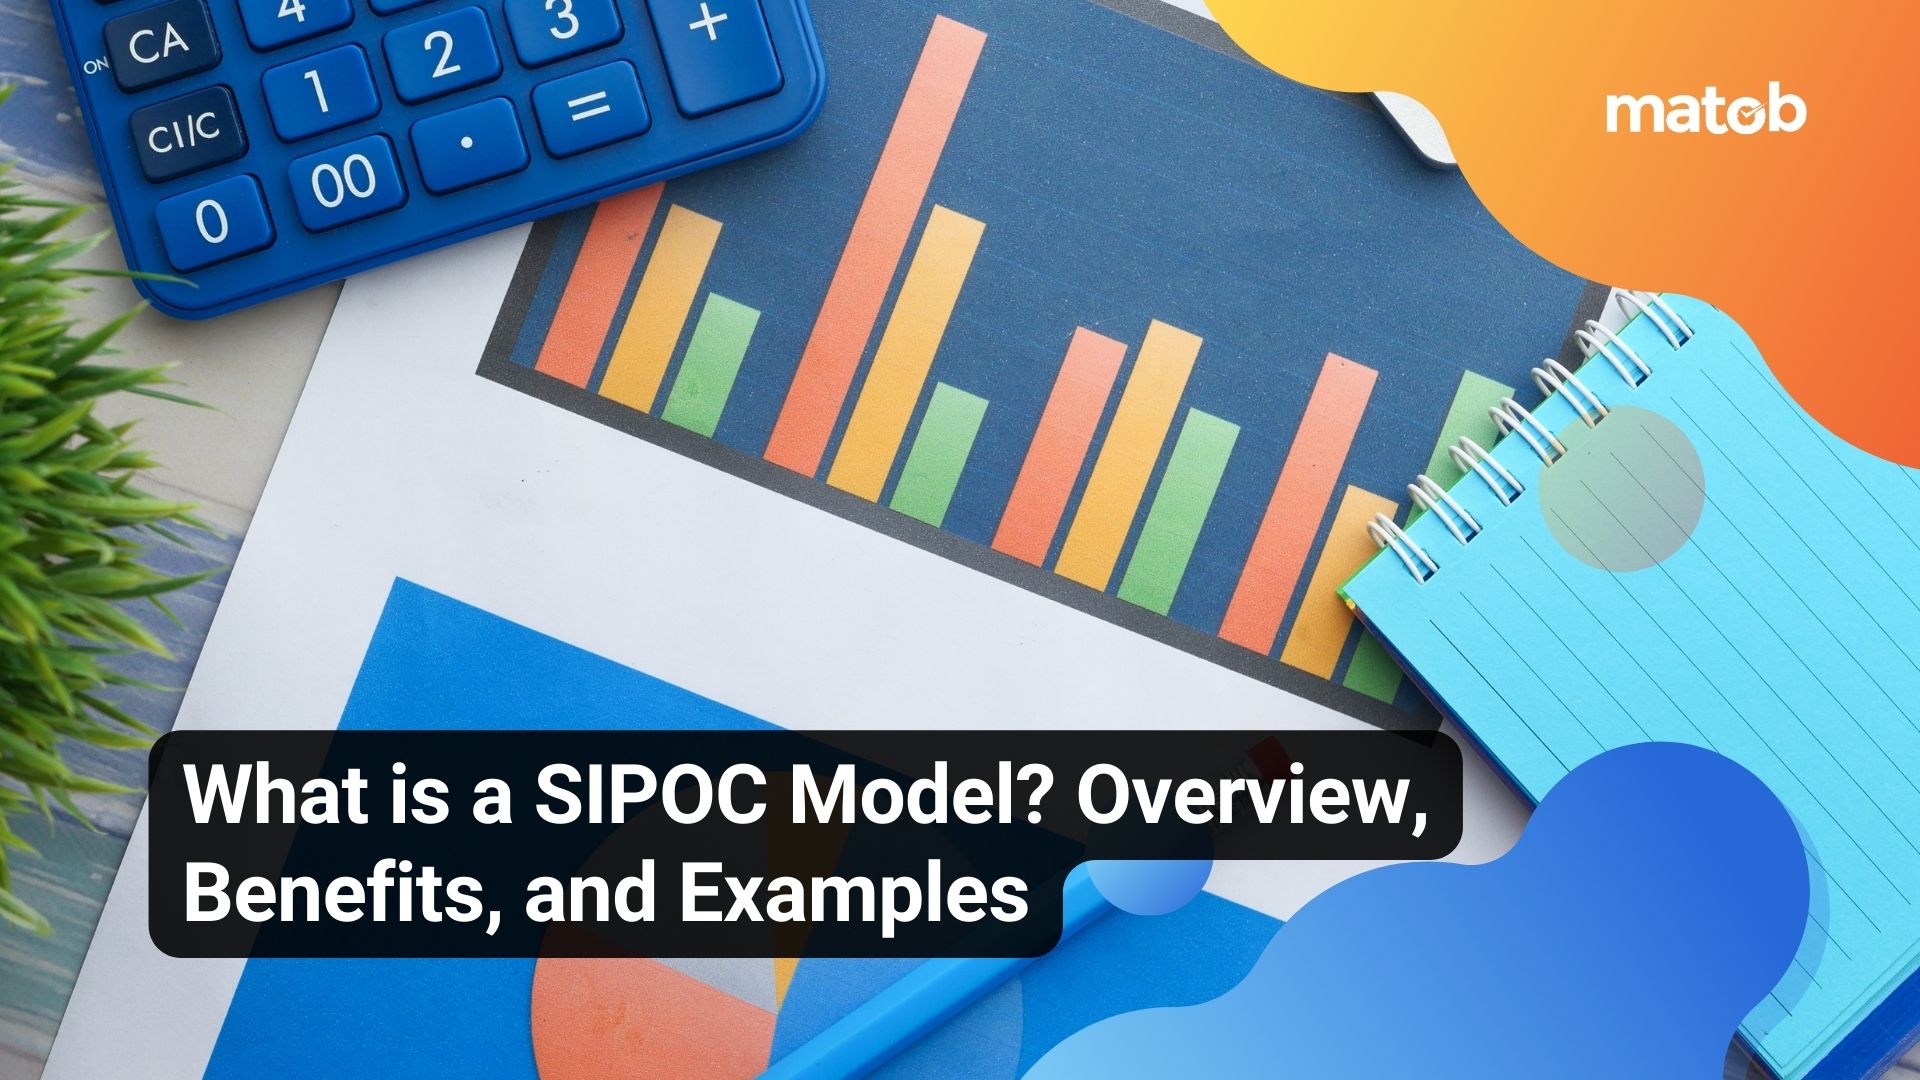 What is a SIPOC Model? Overview, Benefits, and Examples